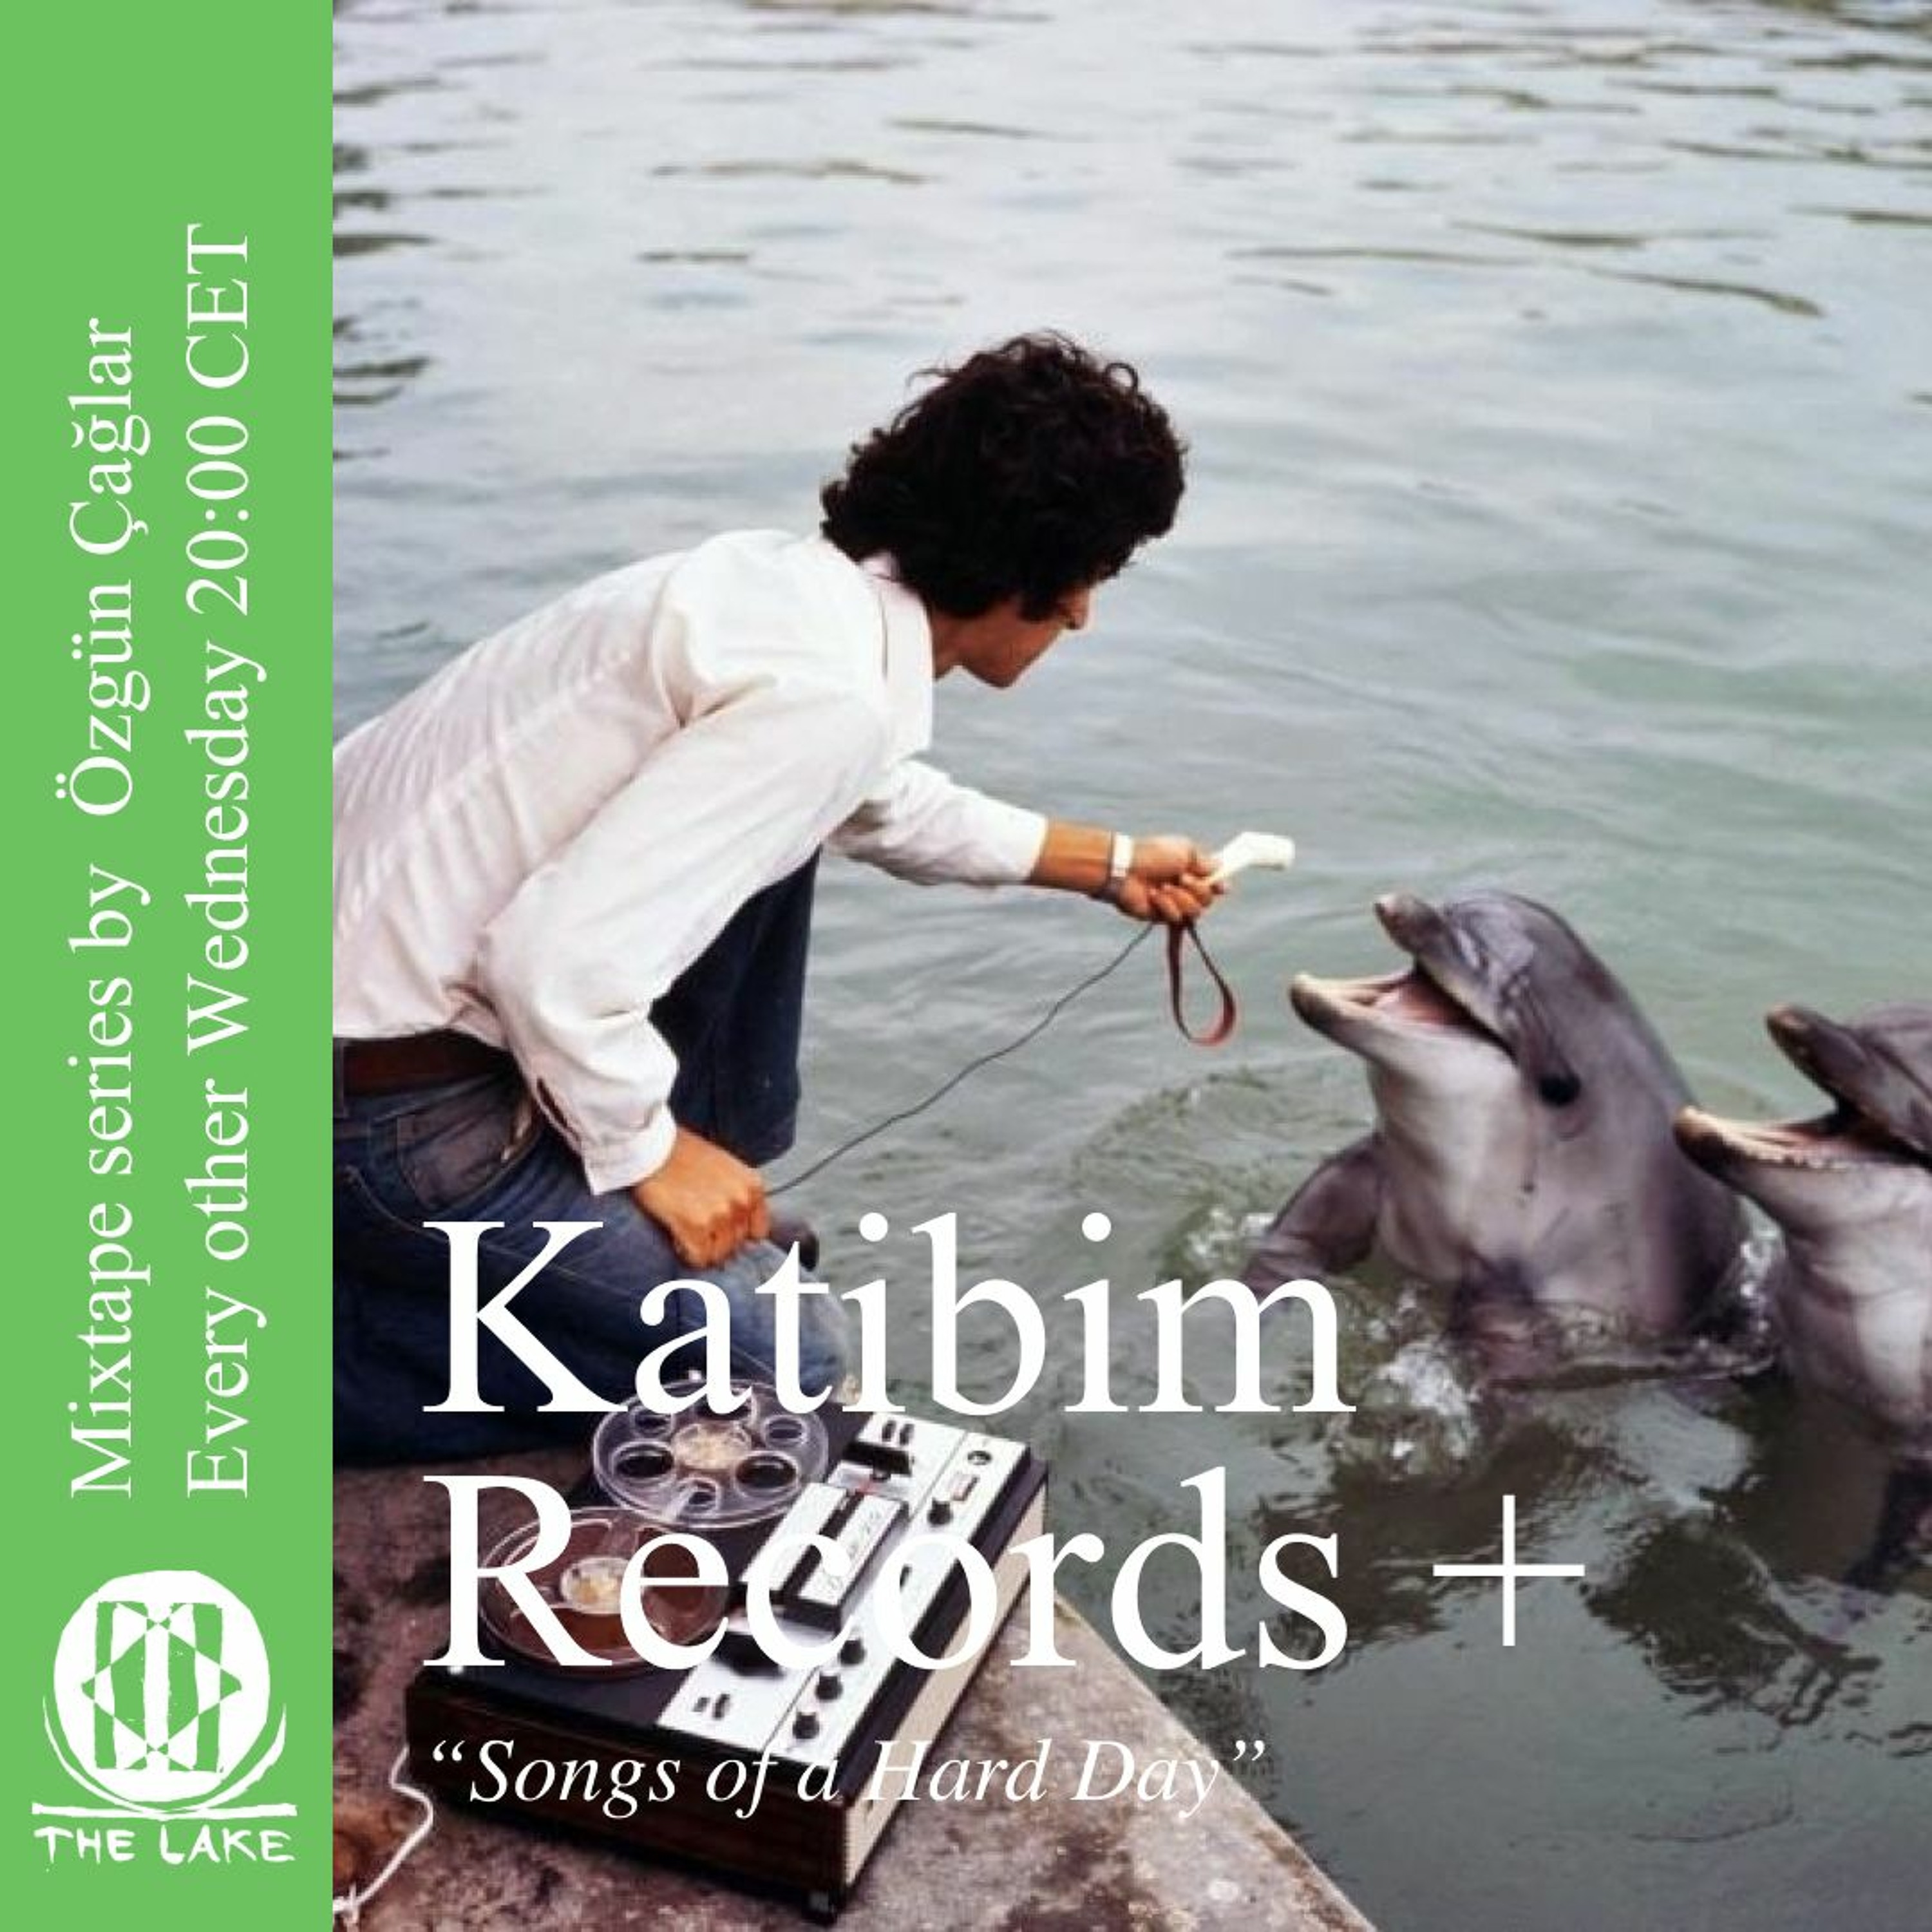 Katibim Records + 12 [Songs of a Hard Day]